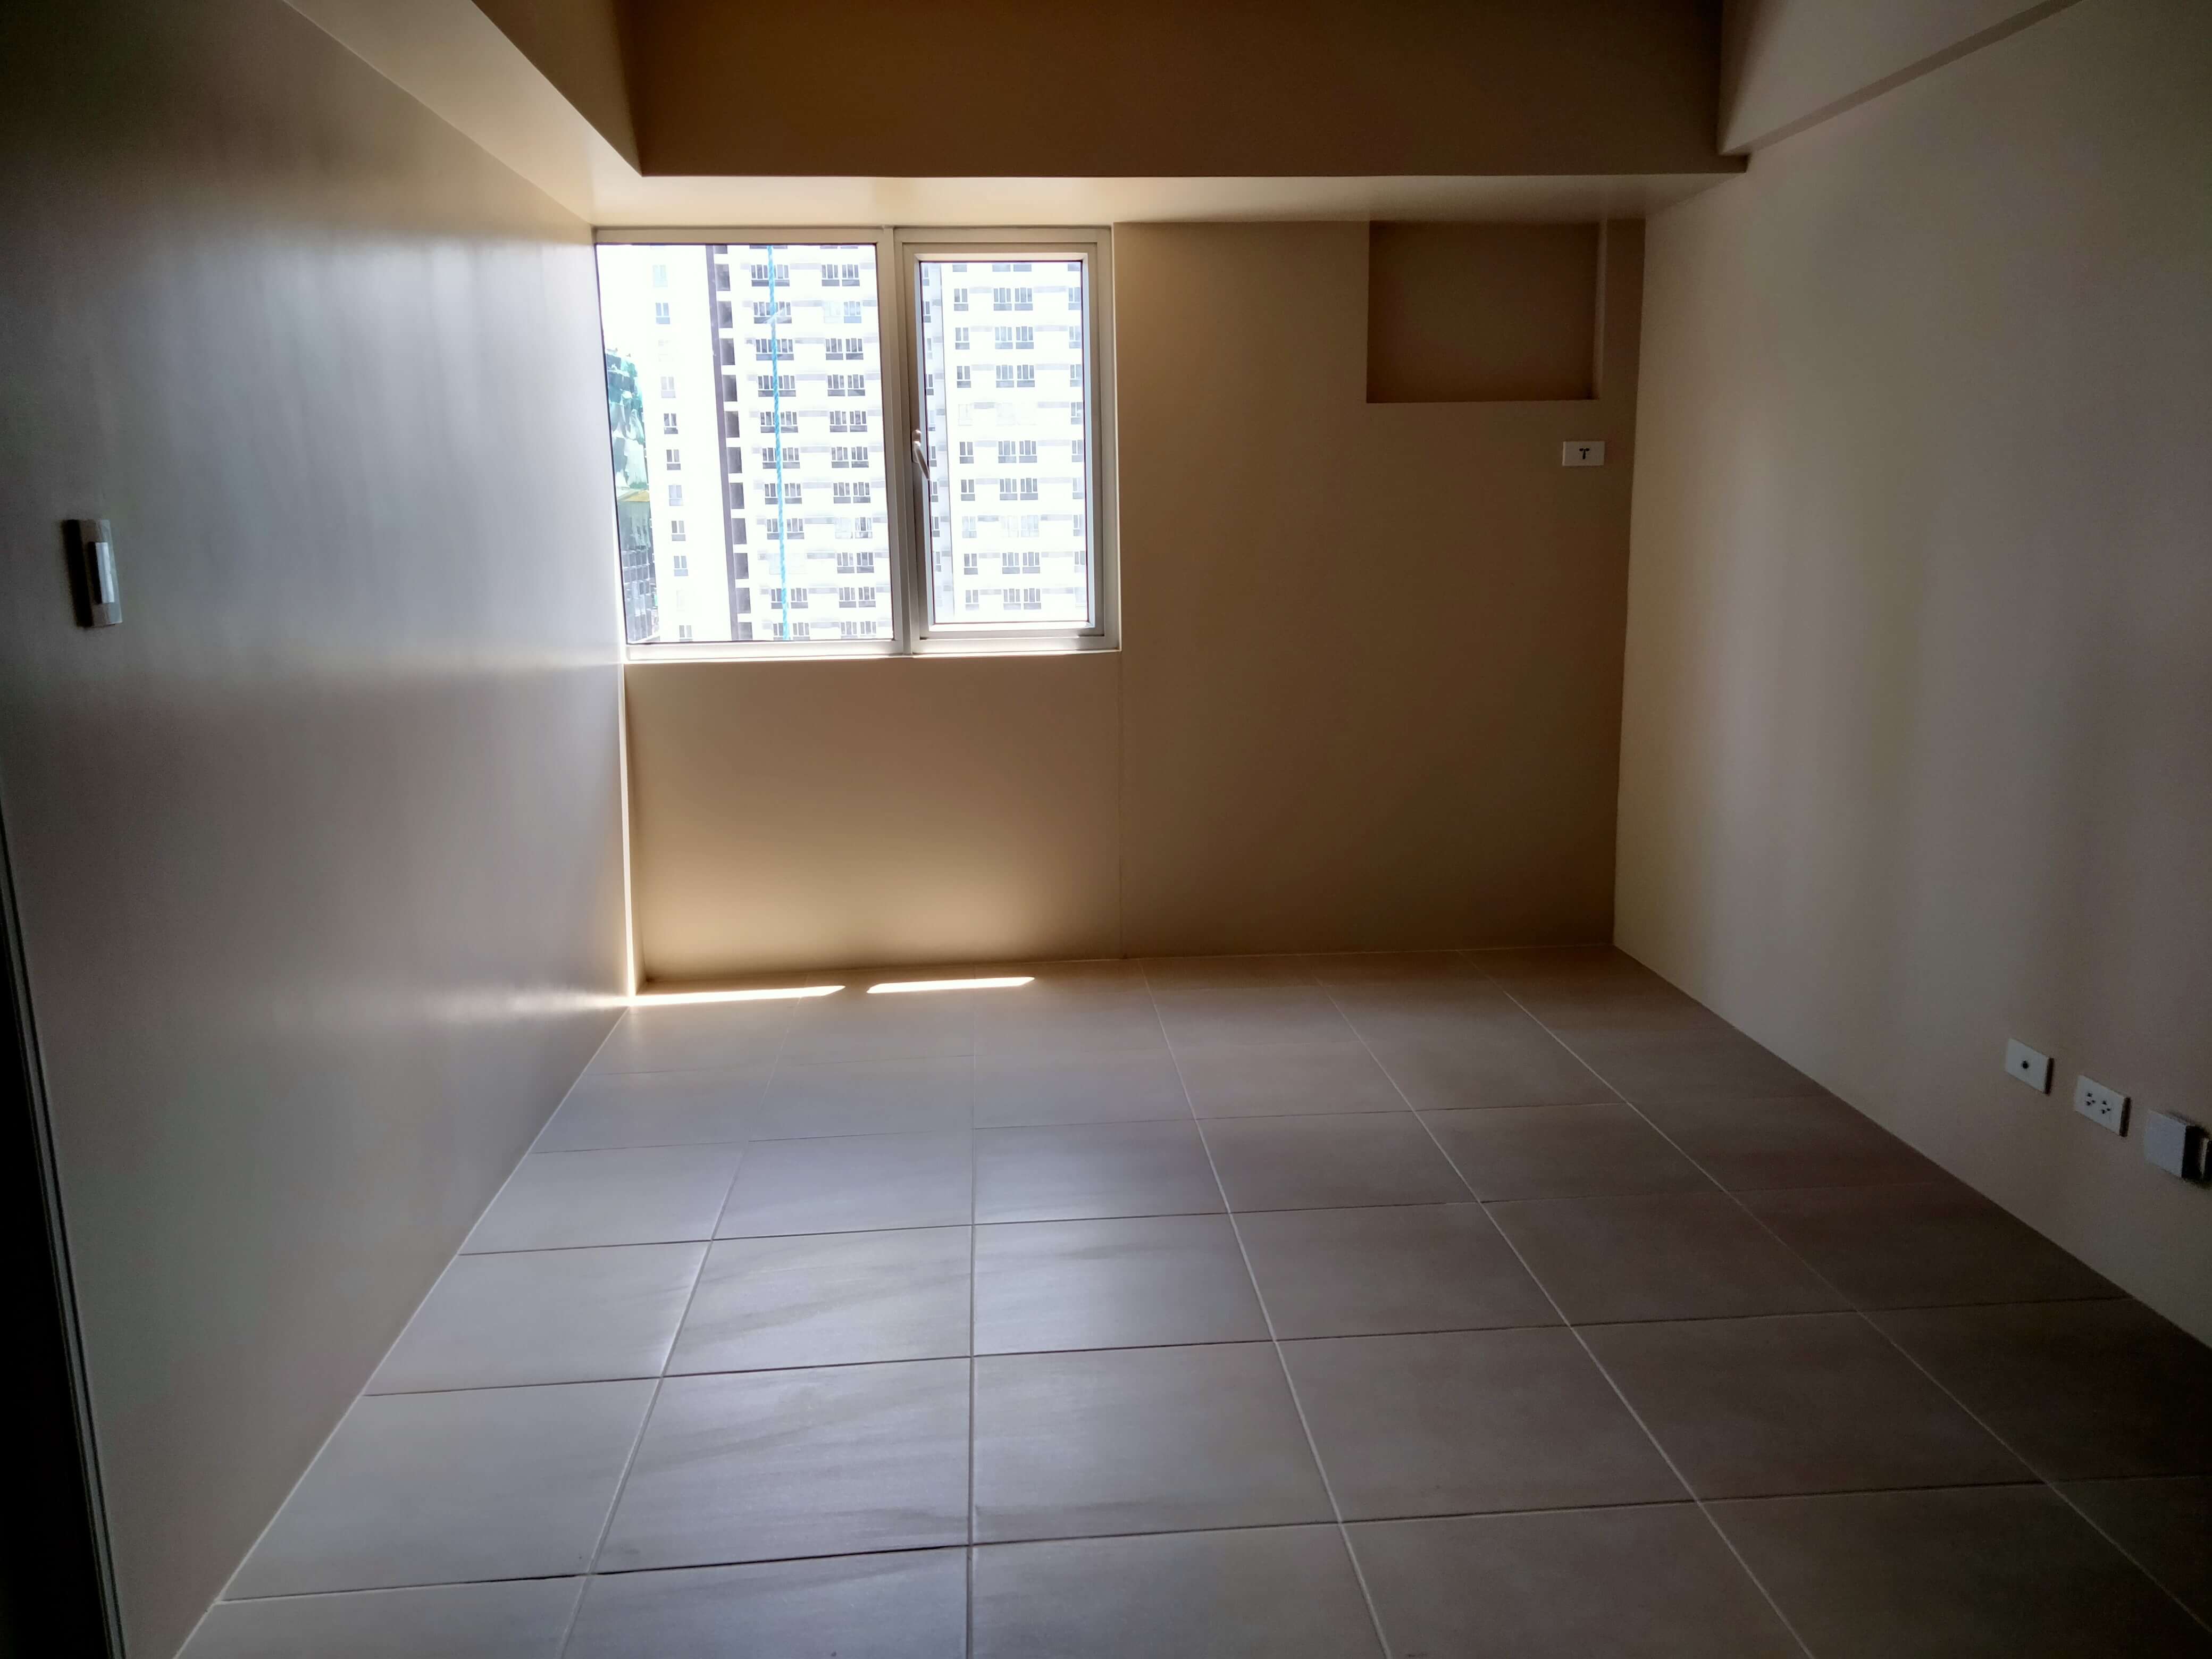 1BR IN TAGUIG